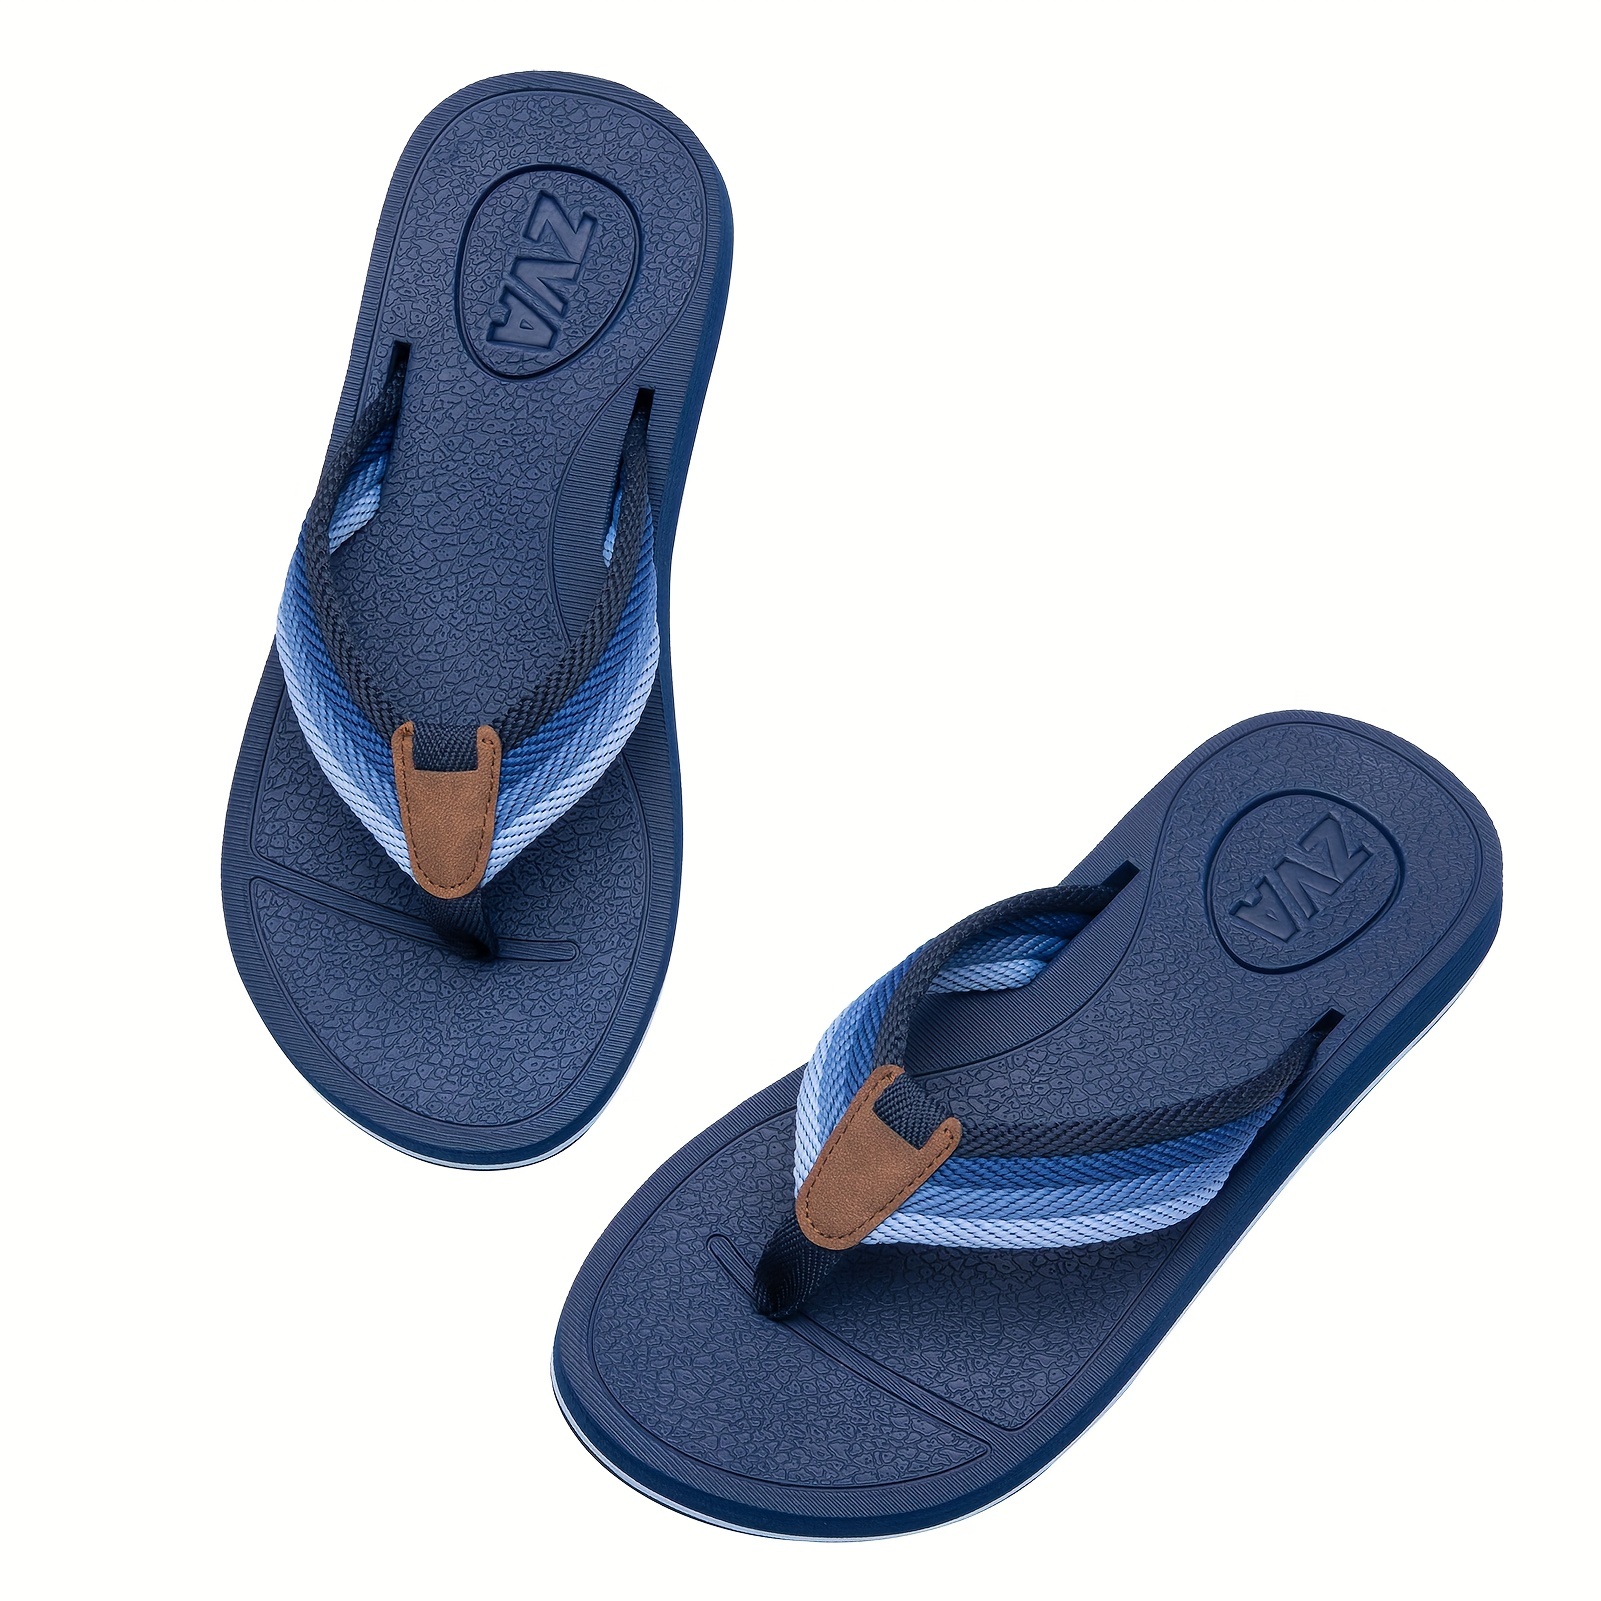 Mens Comfort Flip Flops Casual Thong Sandals With Arch Support